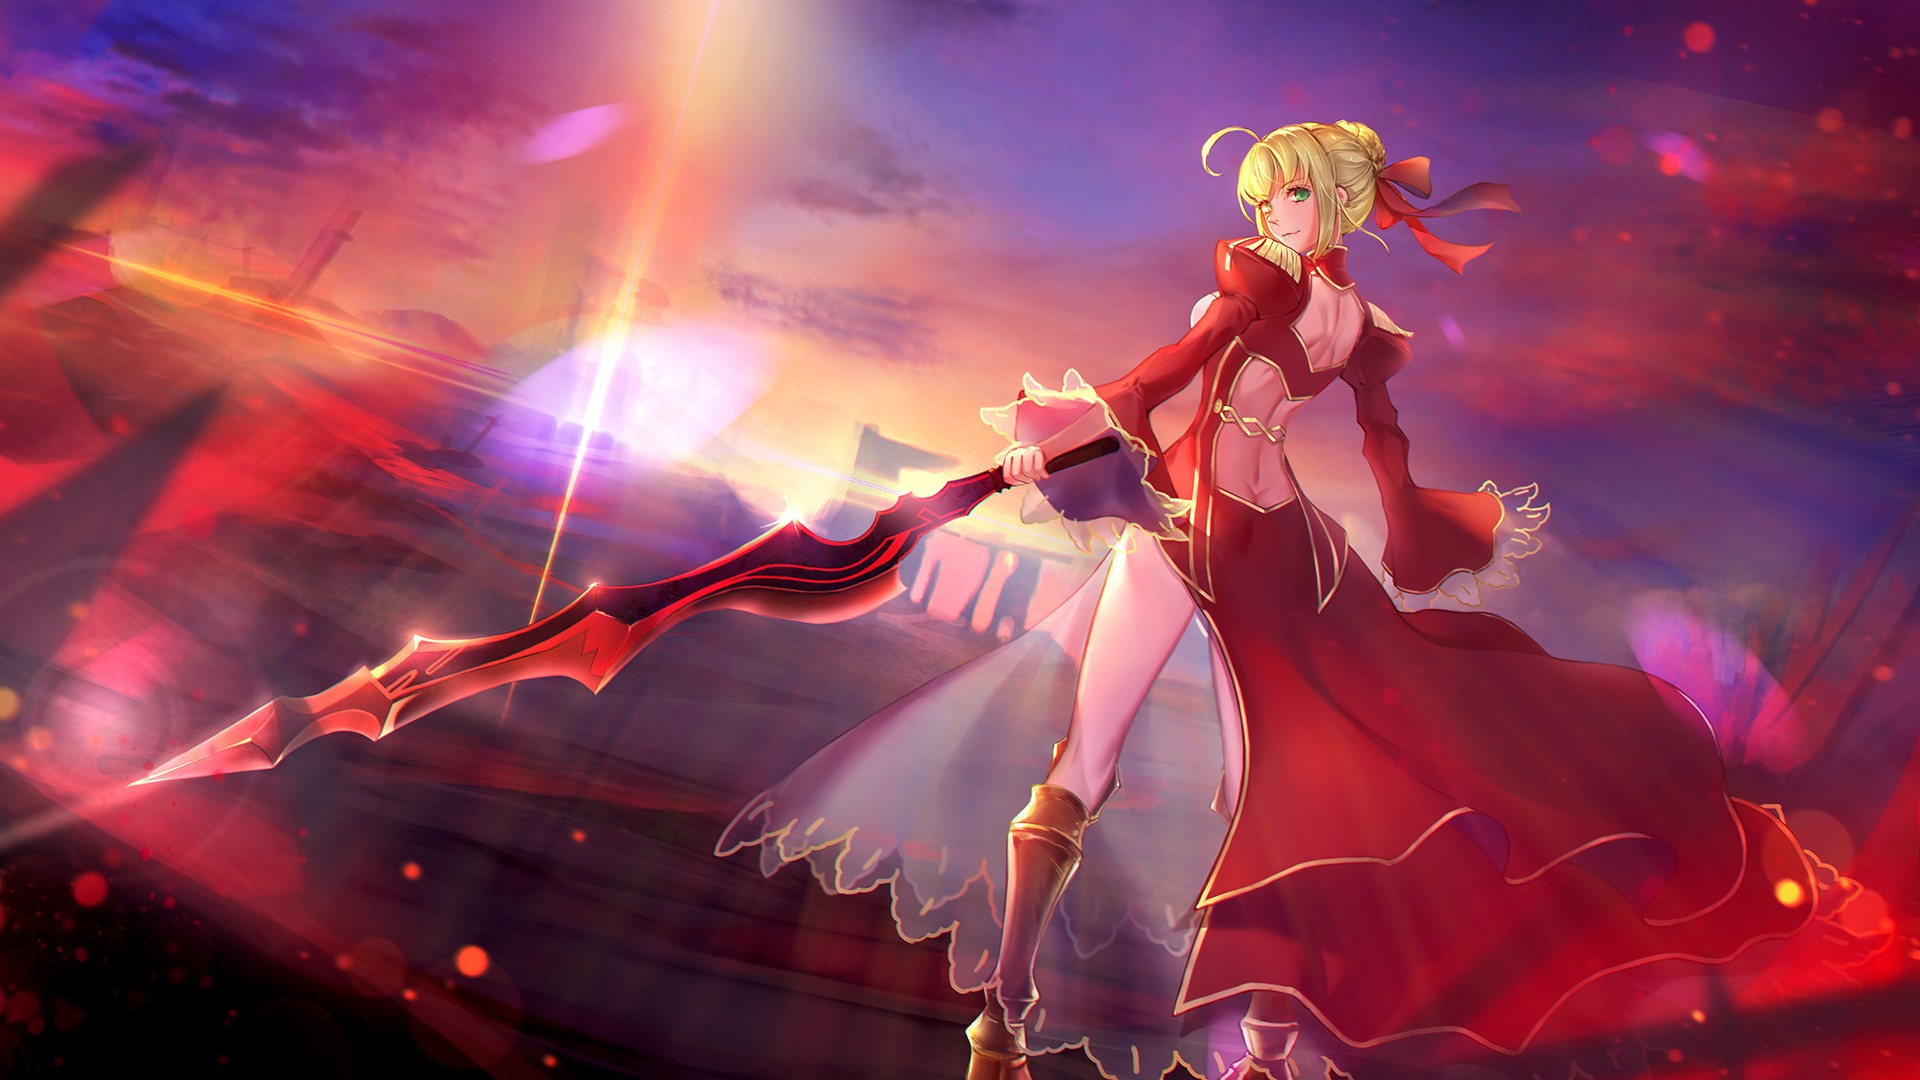 Anime Anime Girls Fate Extra Fate Stay Night Saber Extra Dress Heels Sword Short Hair Blonde Green E 1920x1080